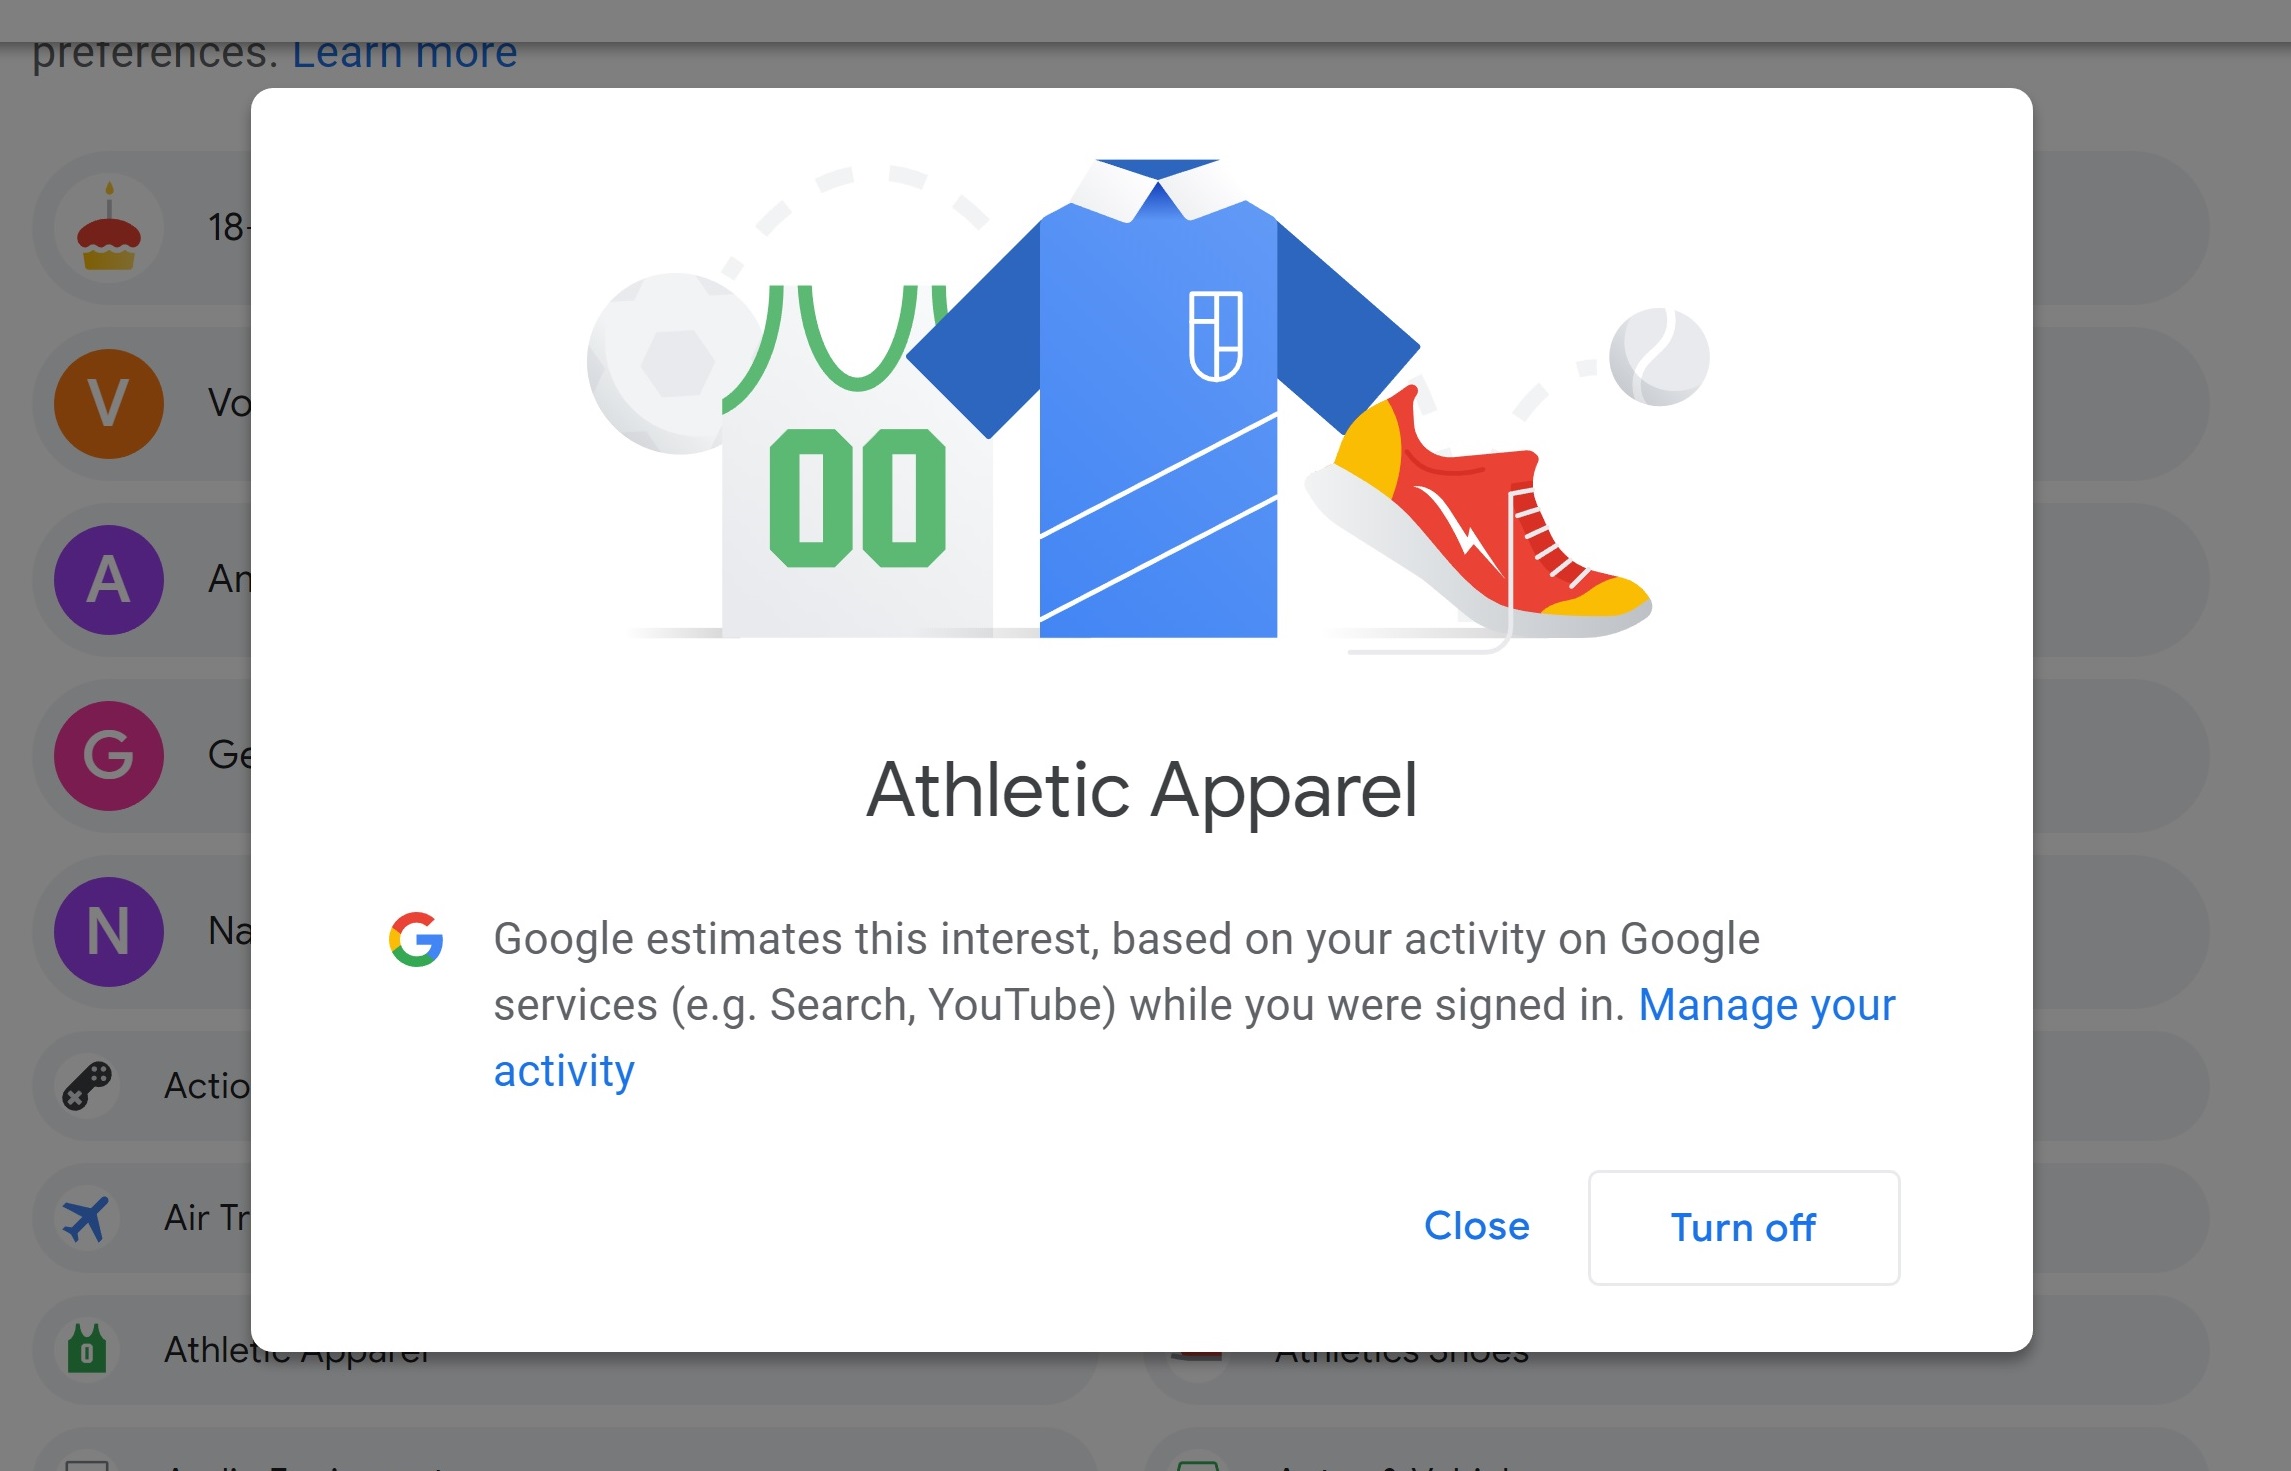 Google Ad settings box for athletic apparel showing some clothes and advertising information.